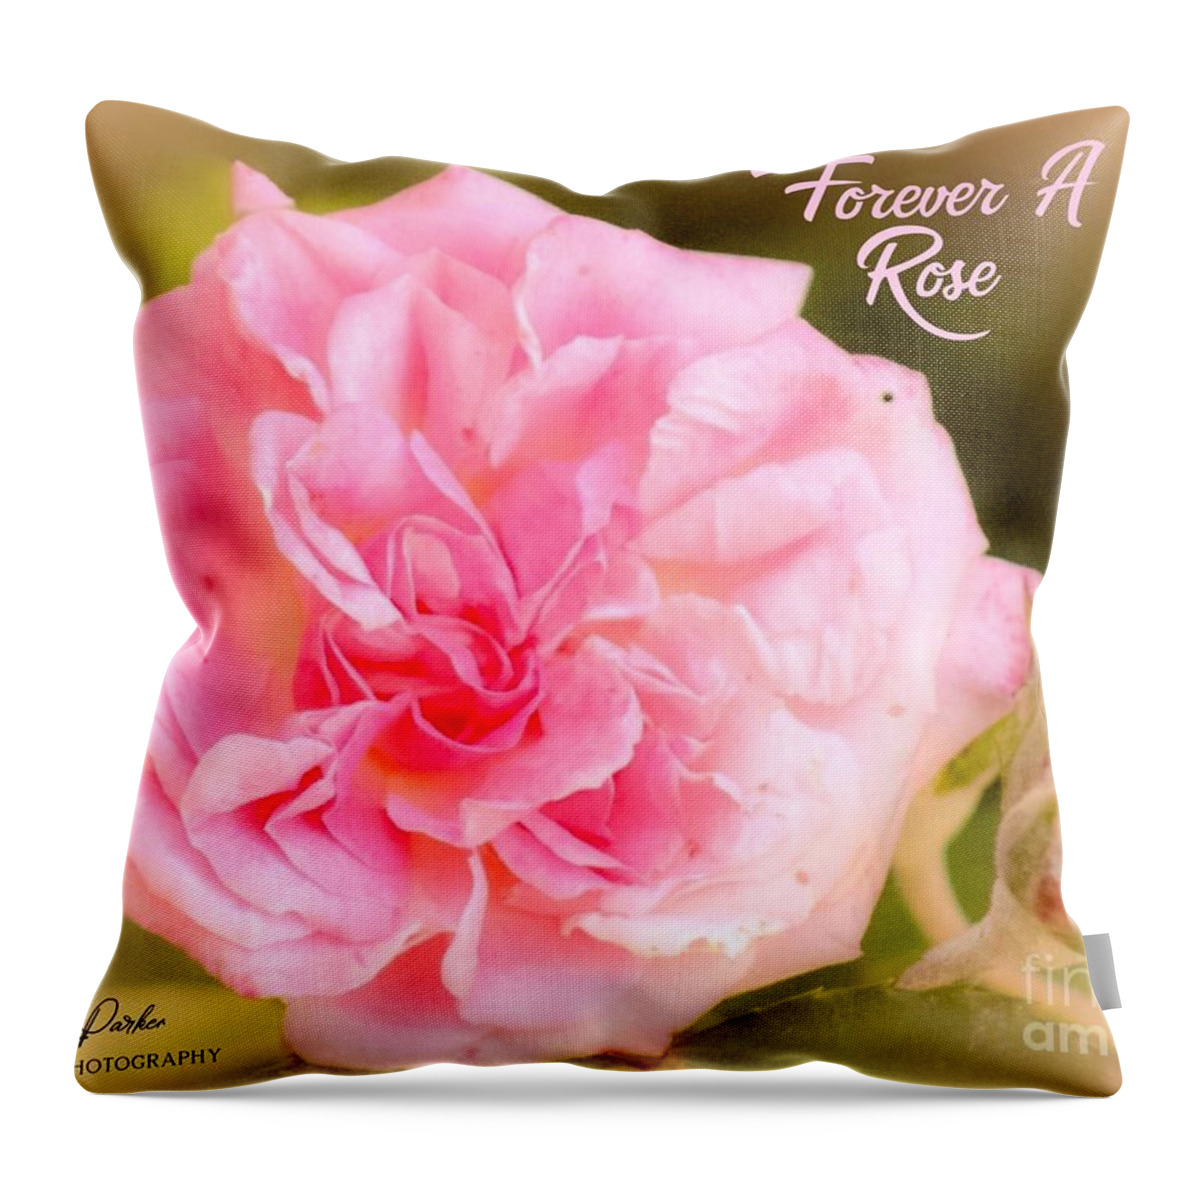 Flower Throw Pillow featuring the mixed media Forever A Rose by MaryLee Parker